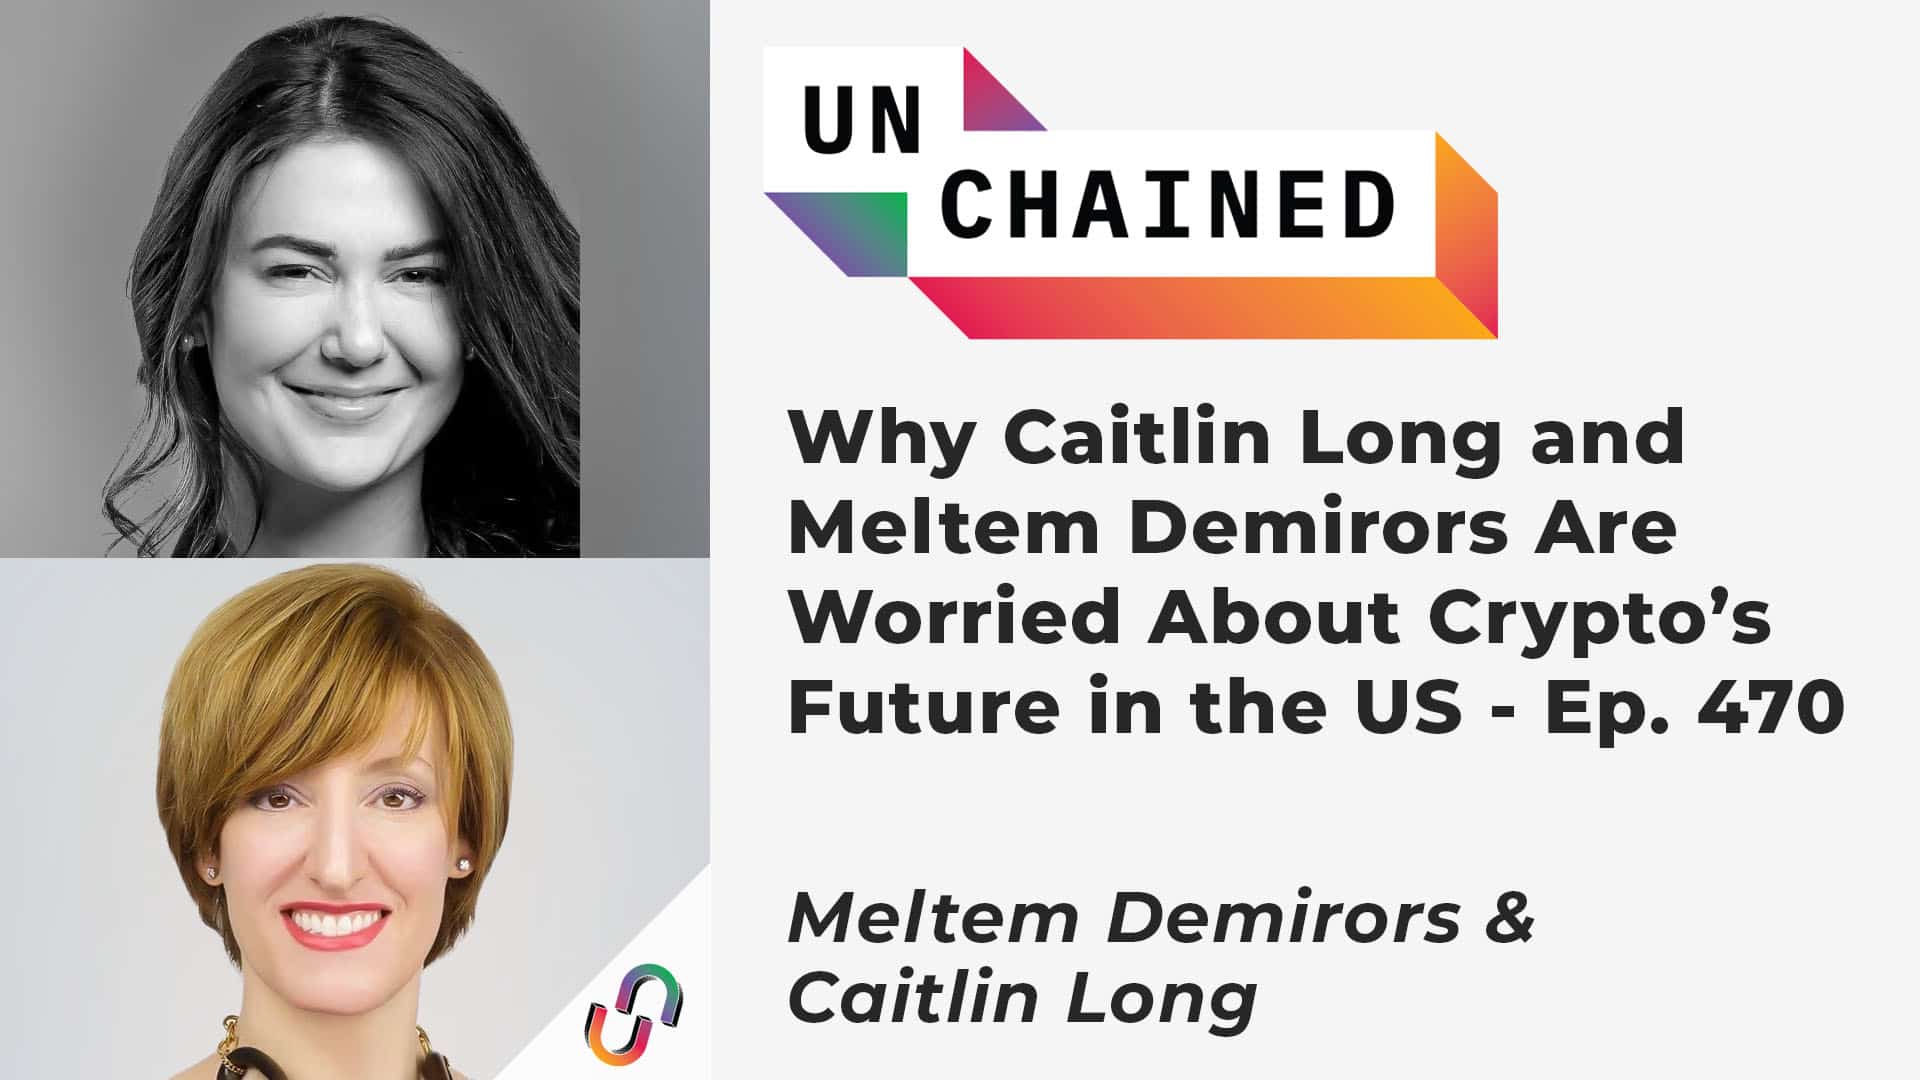 Why Caitlin Long and Meltem Demirors Are Worried About Crypto’s Future in the US - Ep. 470